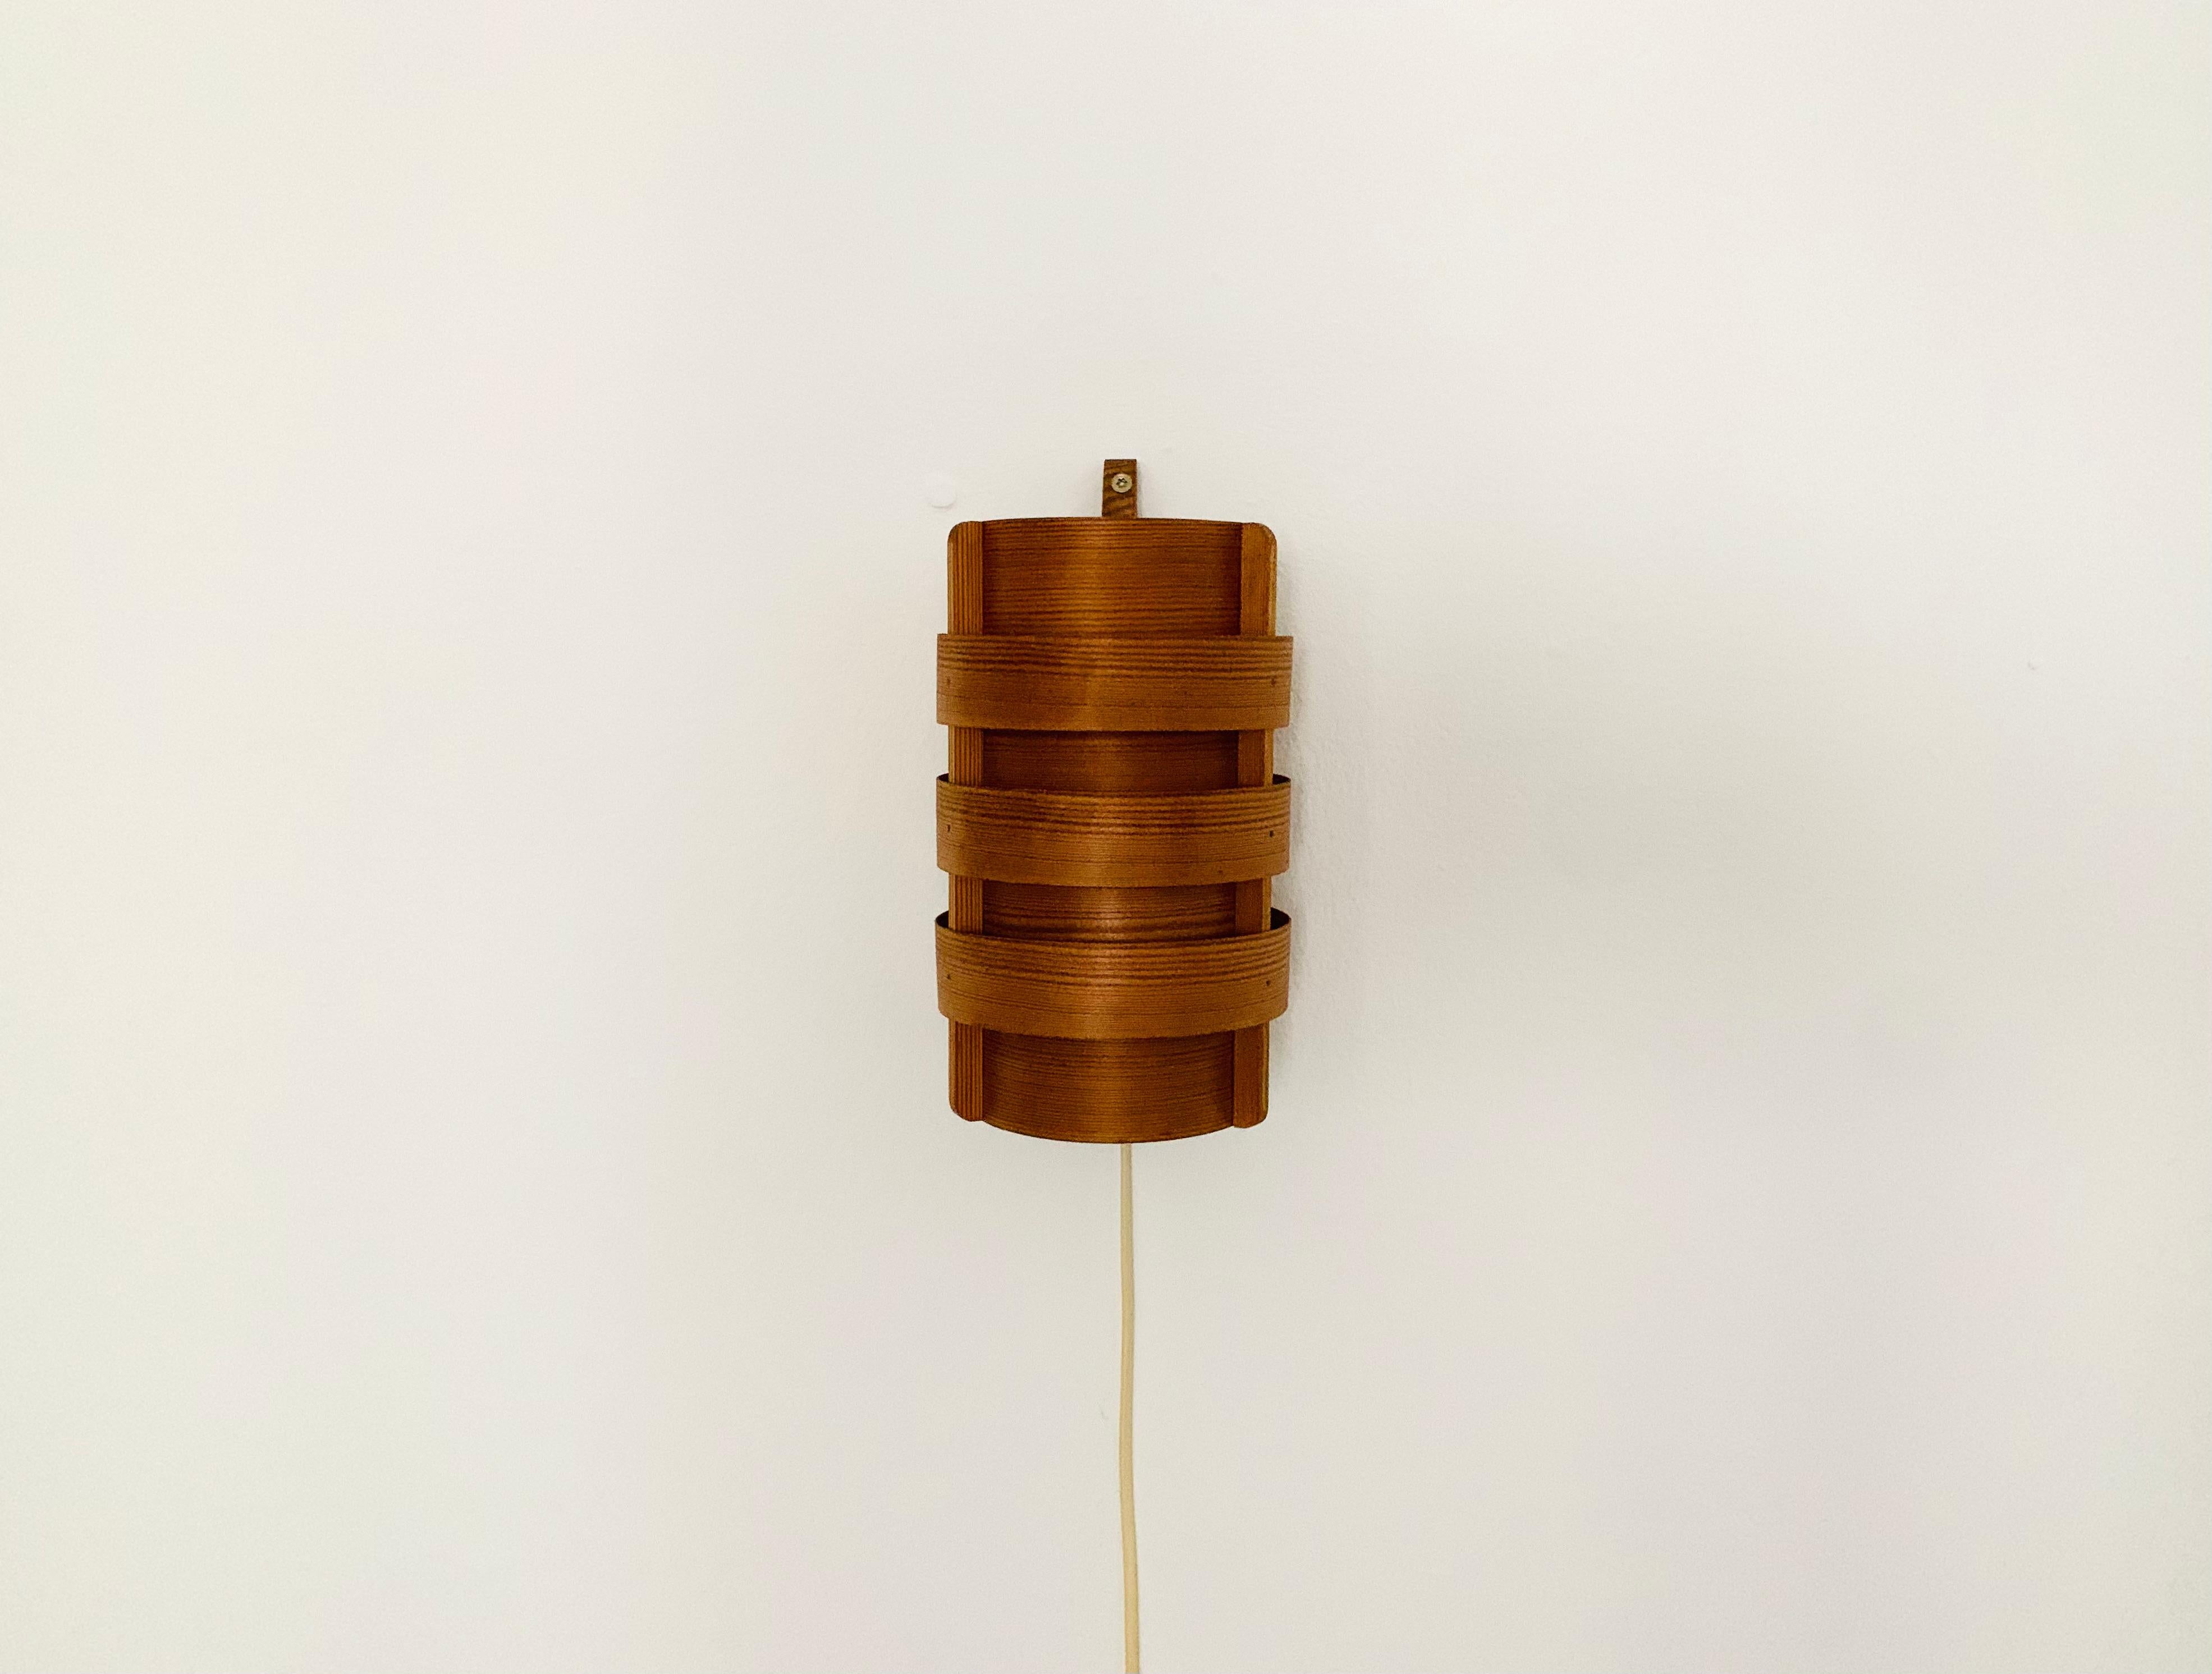 Extraordinarily beautiful wooden wall lamp from the 1960s.
Loving and high-quality processing.
The design and the material create a very warm and pleasant light.
The play of light created by the slats makes the lamp even more impressive.
